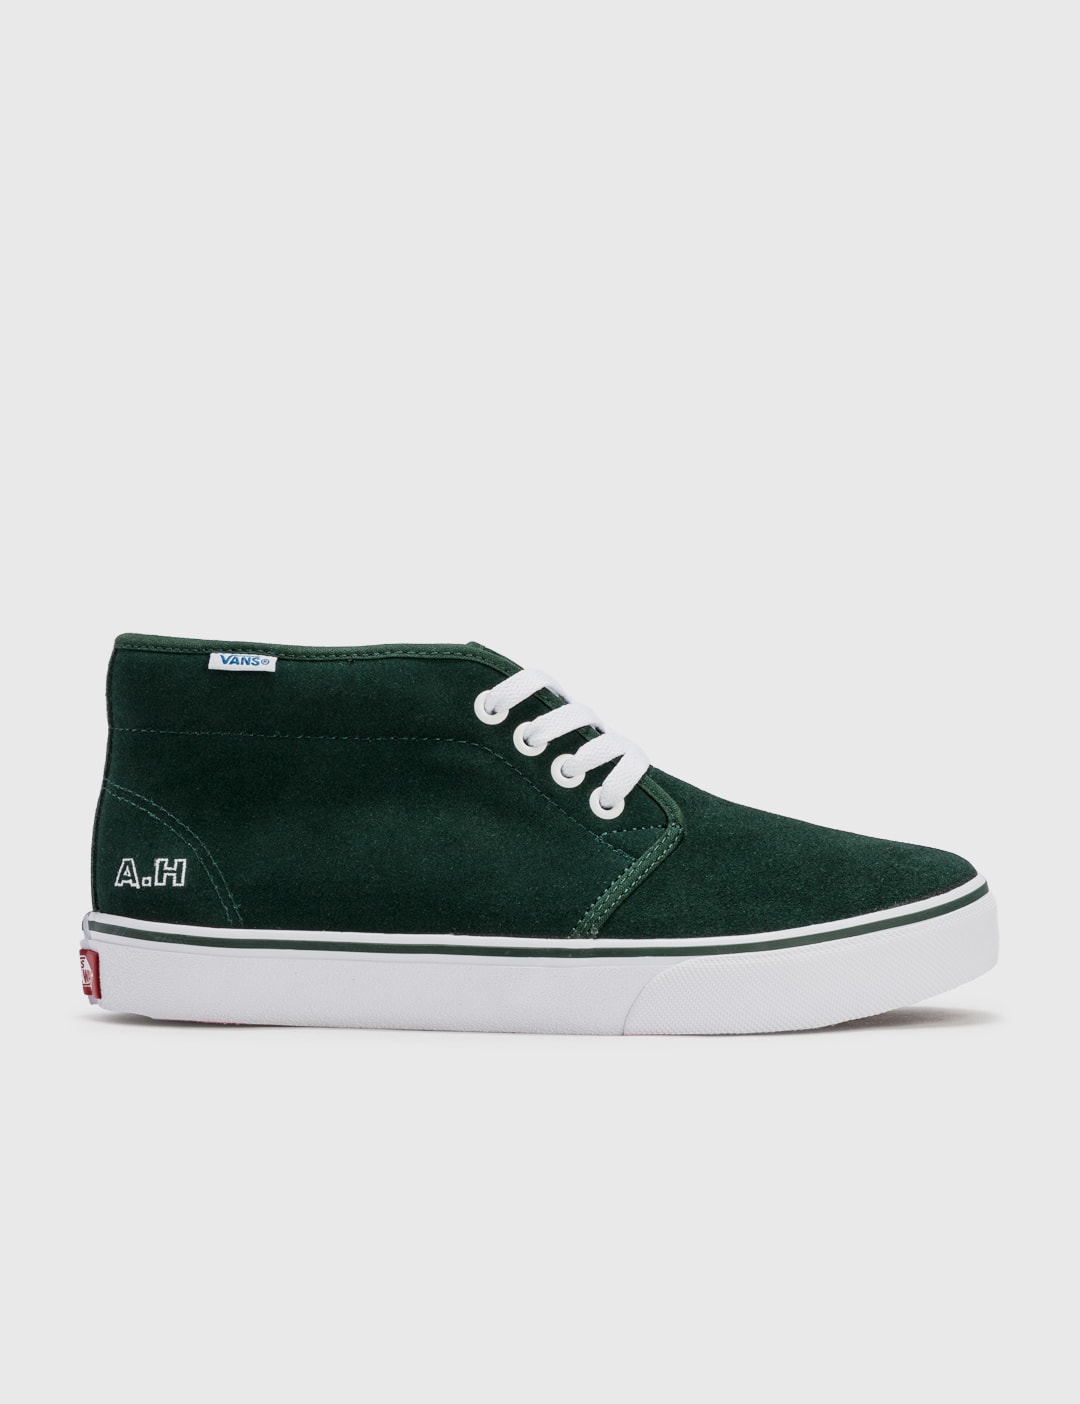 VANS X A.H CHUKKA Sneakers Placeholder Image